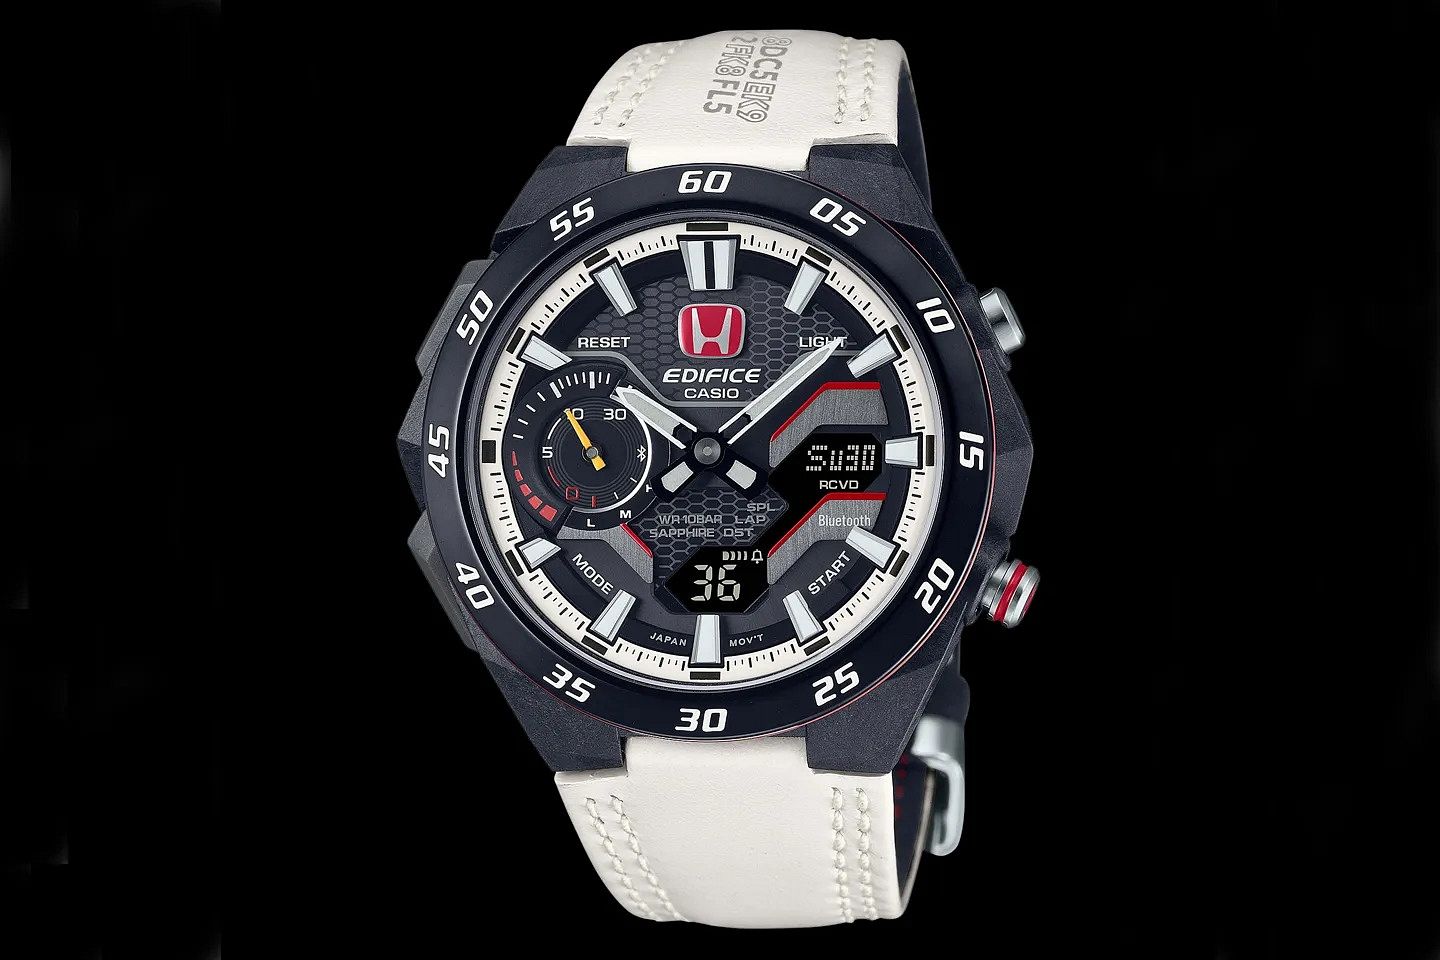 Casio Reveals Awesome New Edifice Watch Inspired By The Honda Type R